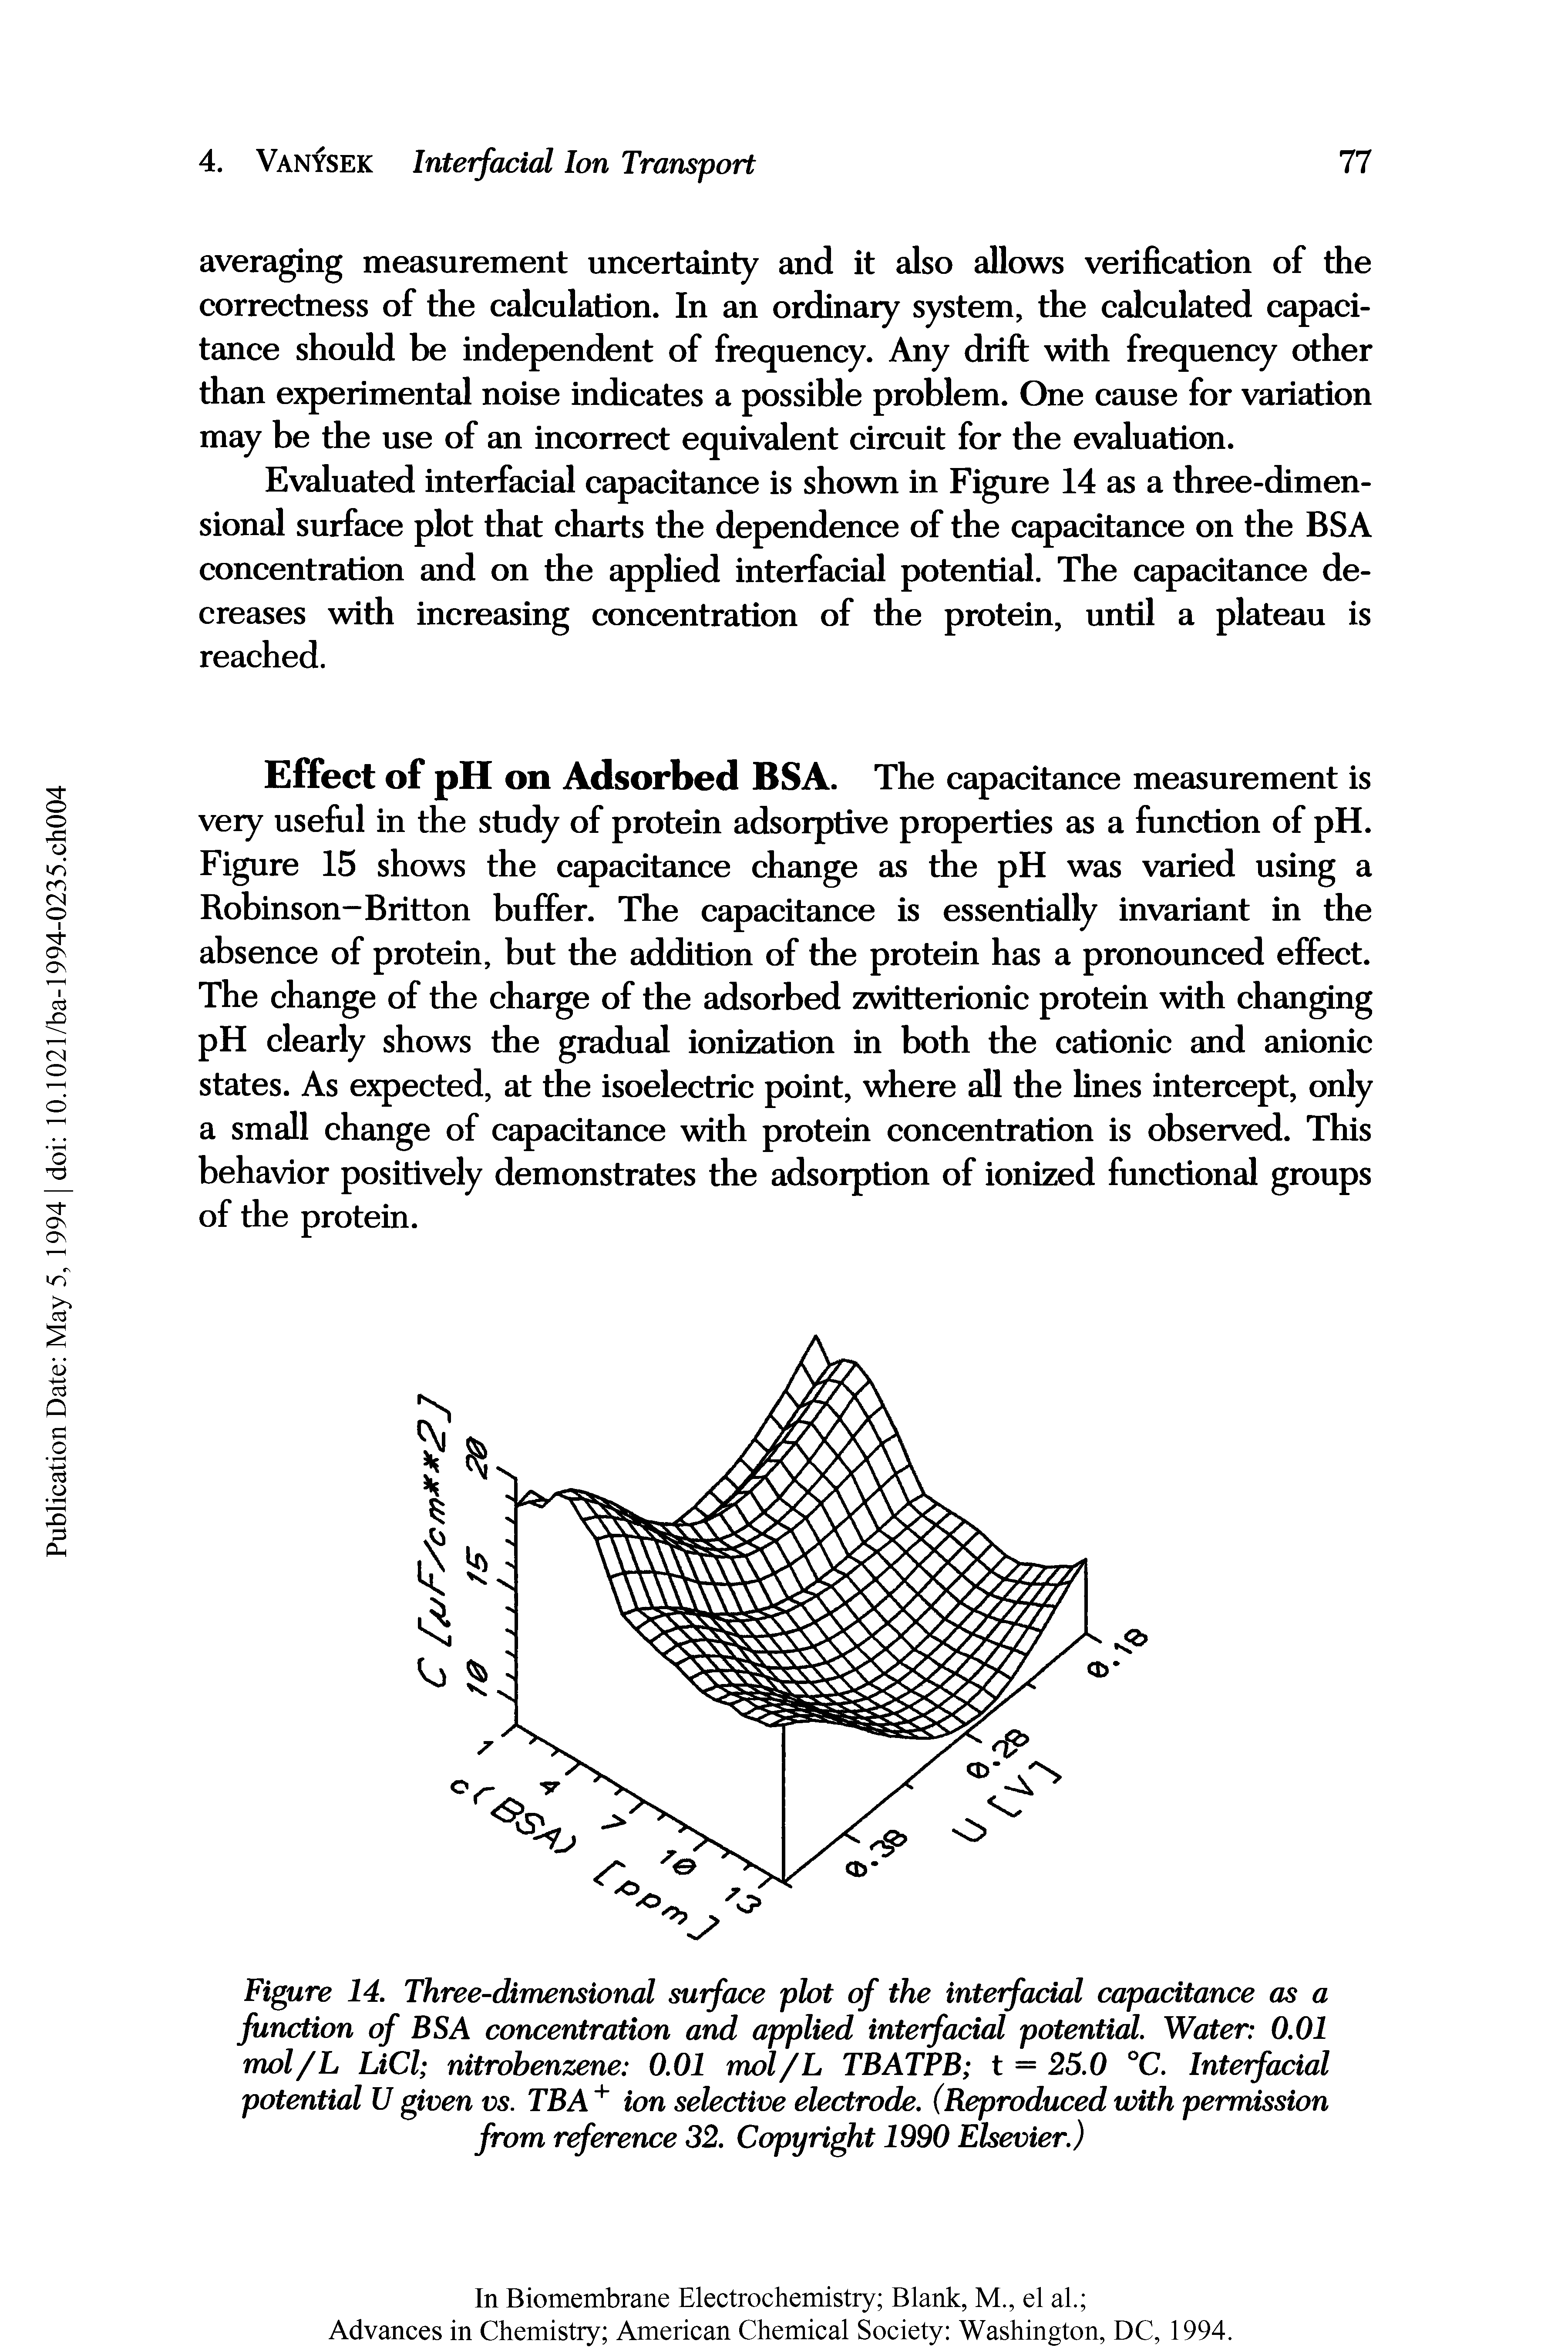 Figure 14. Three-dimensional surface plot of the interfacial capacitance as a function of BSA concentration and applied interfacial potential. Water 0.01 mol/L LiCl nitrobenzene 0.01 mol/L TBATPB t = 25.0 °C. Interfacial potential U given vs. TBA + ion selective electrode. (Reproduced with permission from reference 32. Copyright 1990 Elsevier.)...